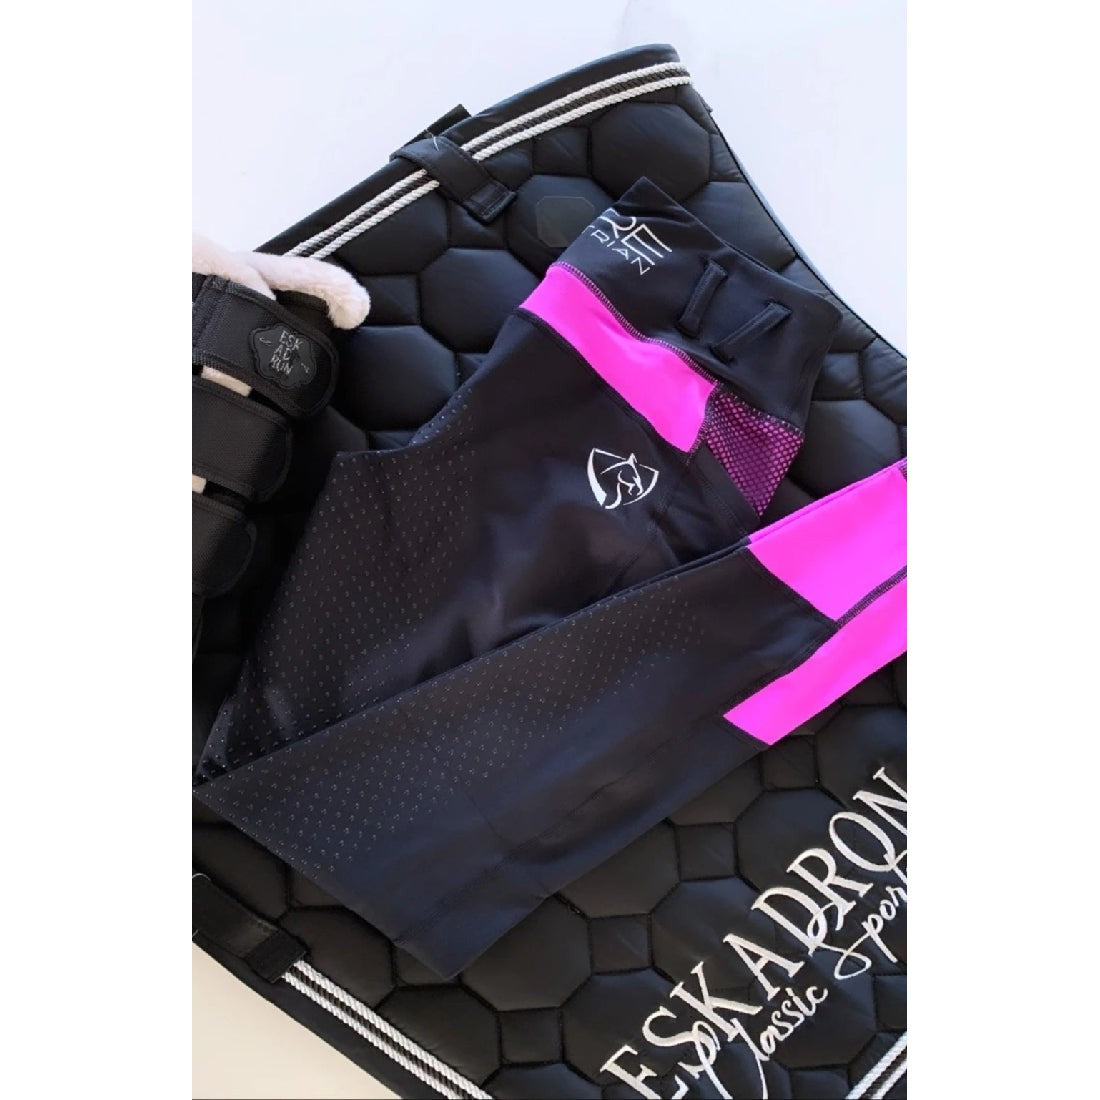 Black and pink horse riding tights displayed on equestrian gear.